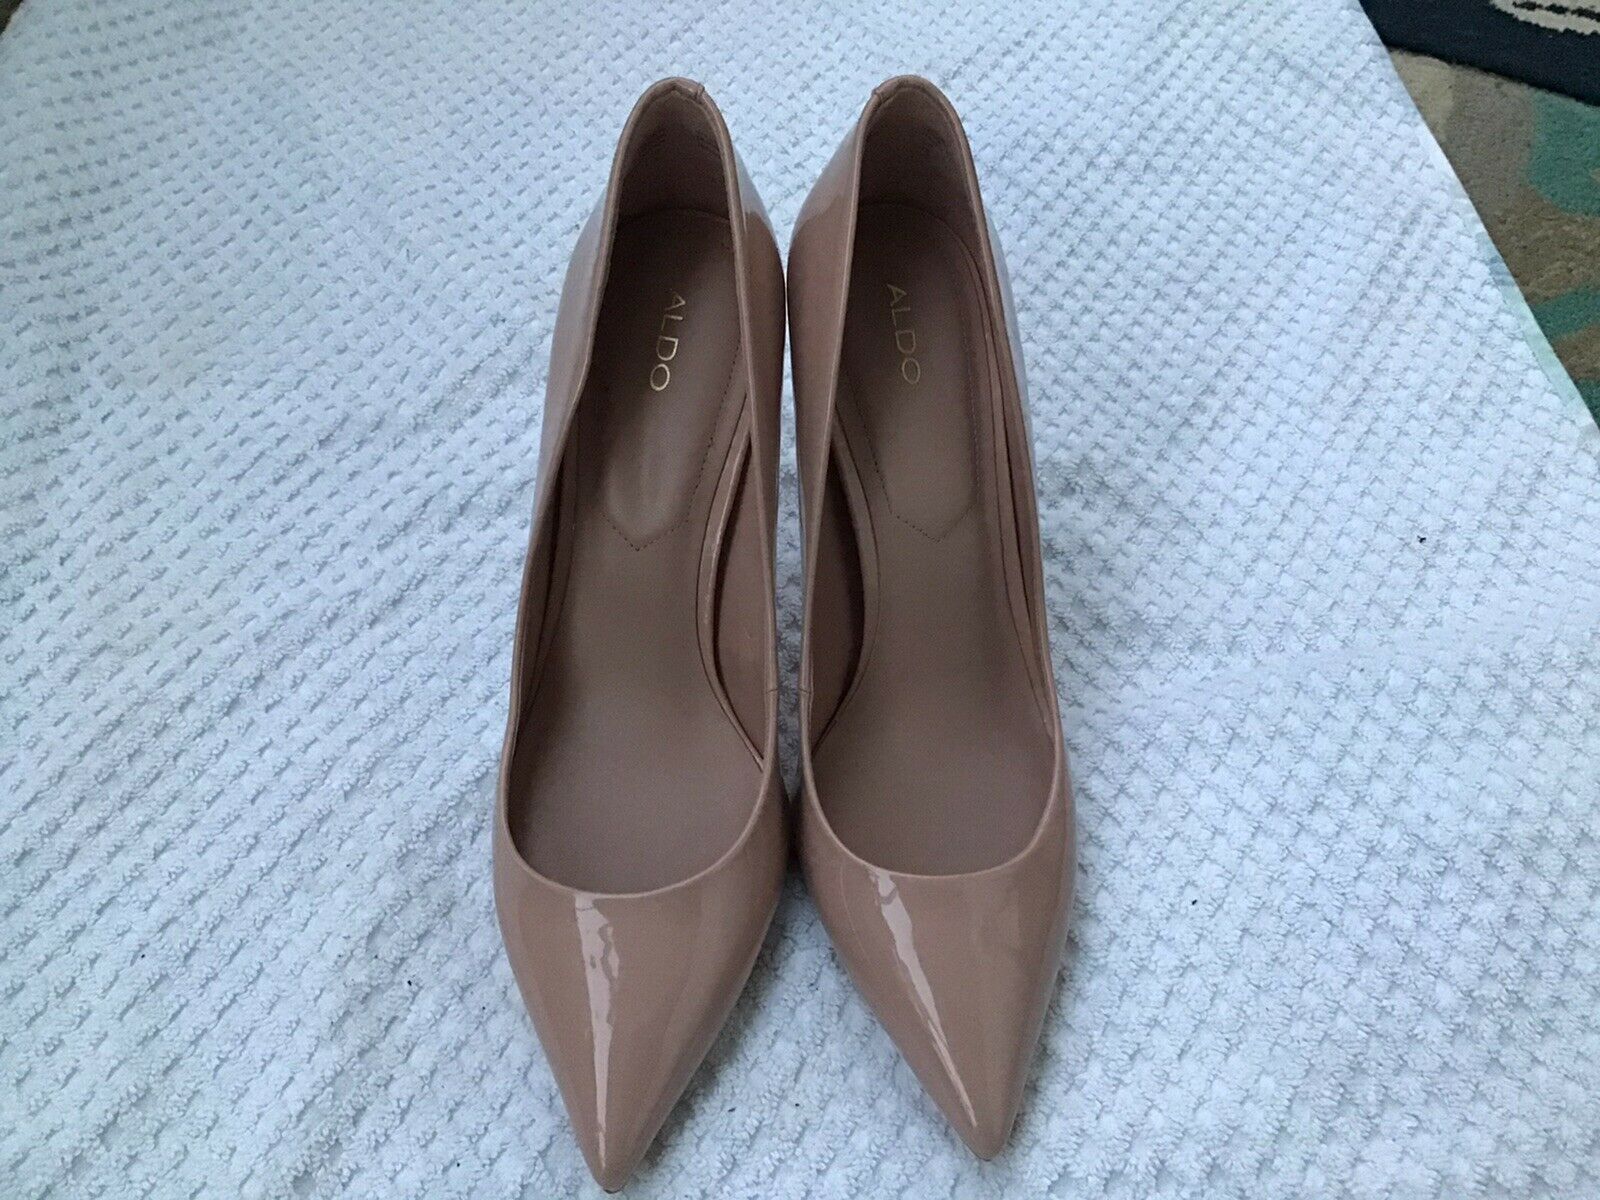 Aldo tan patent leather woman’s high heel shoes size 10, new no box.